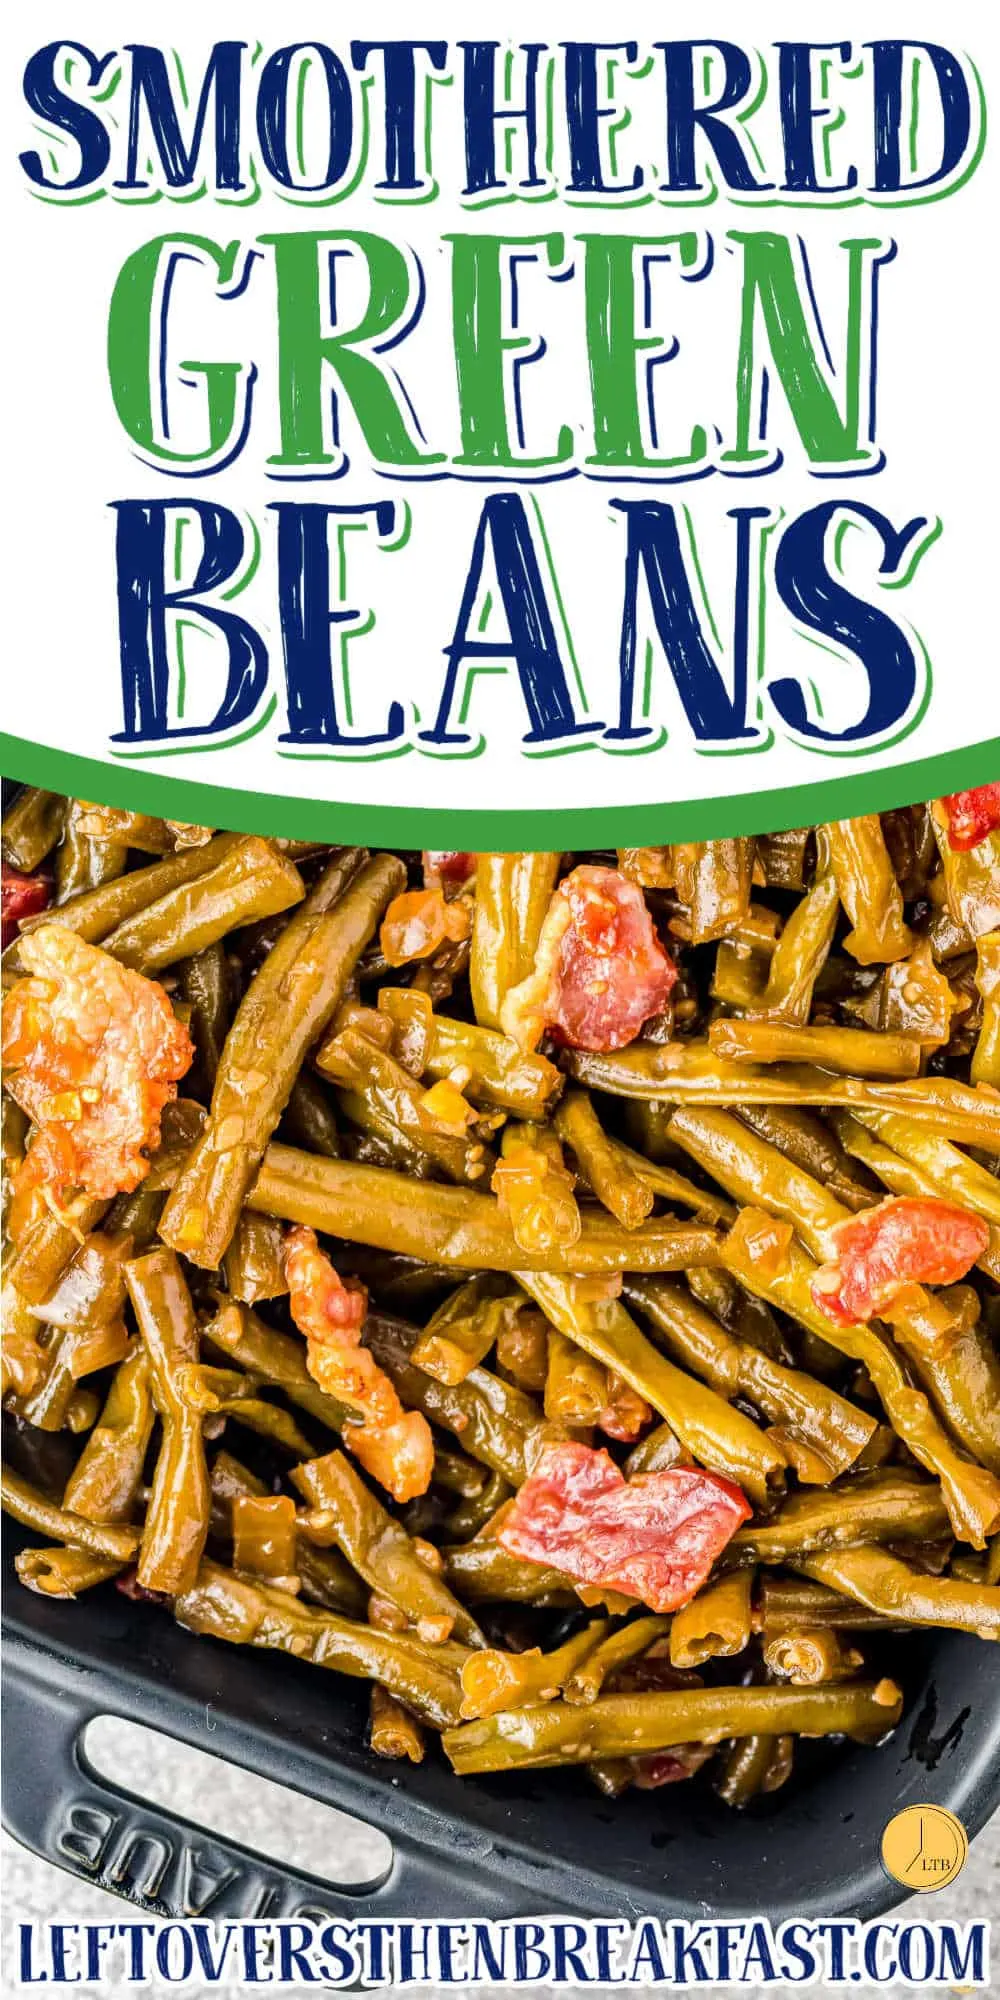 dish of green beans with text "smothered green beans"